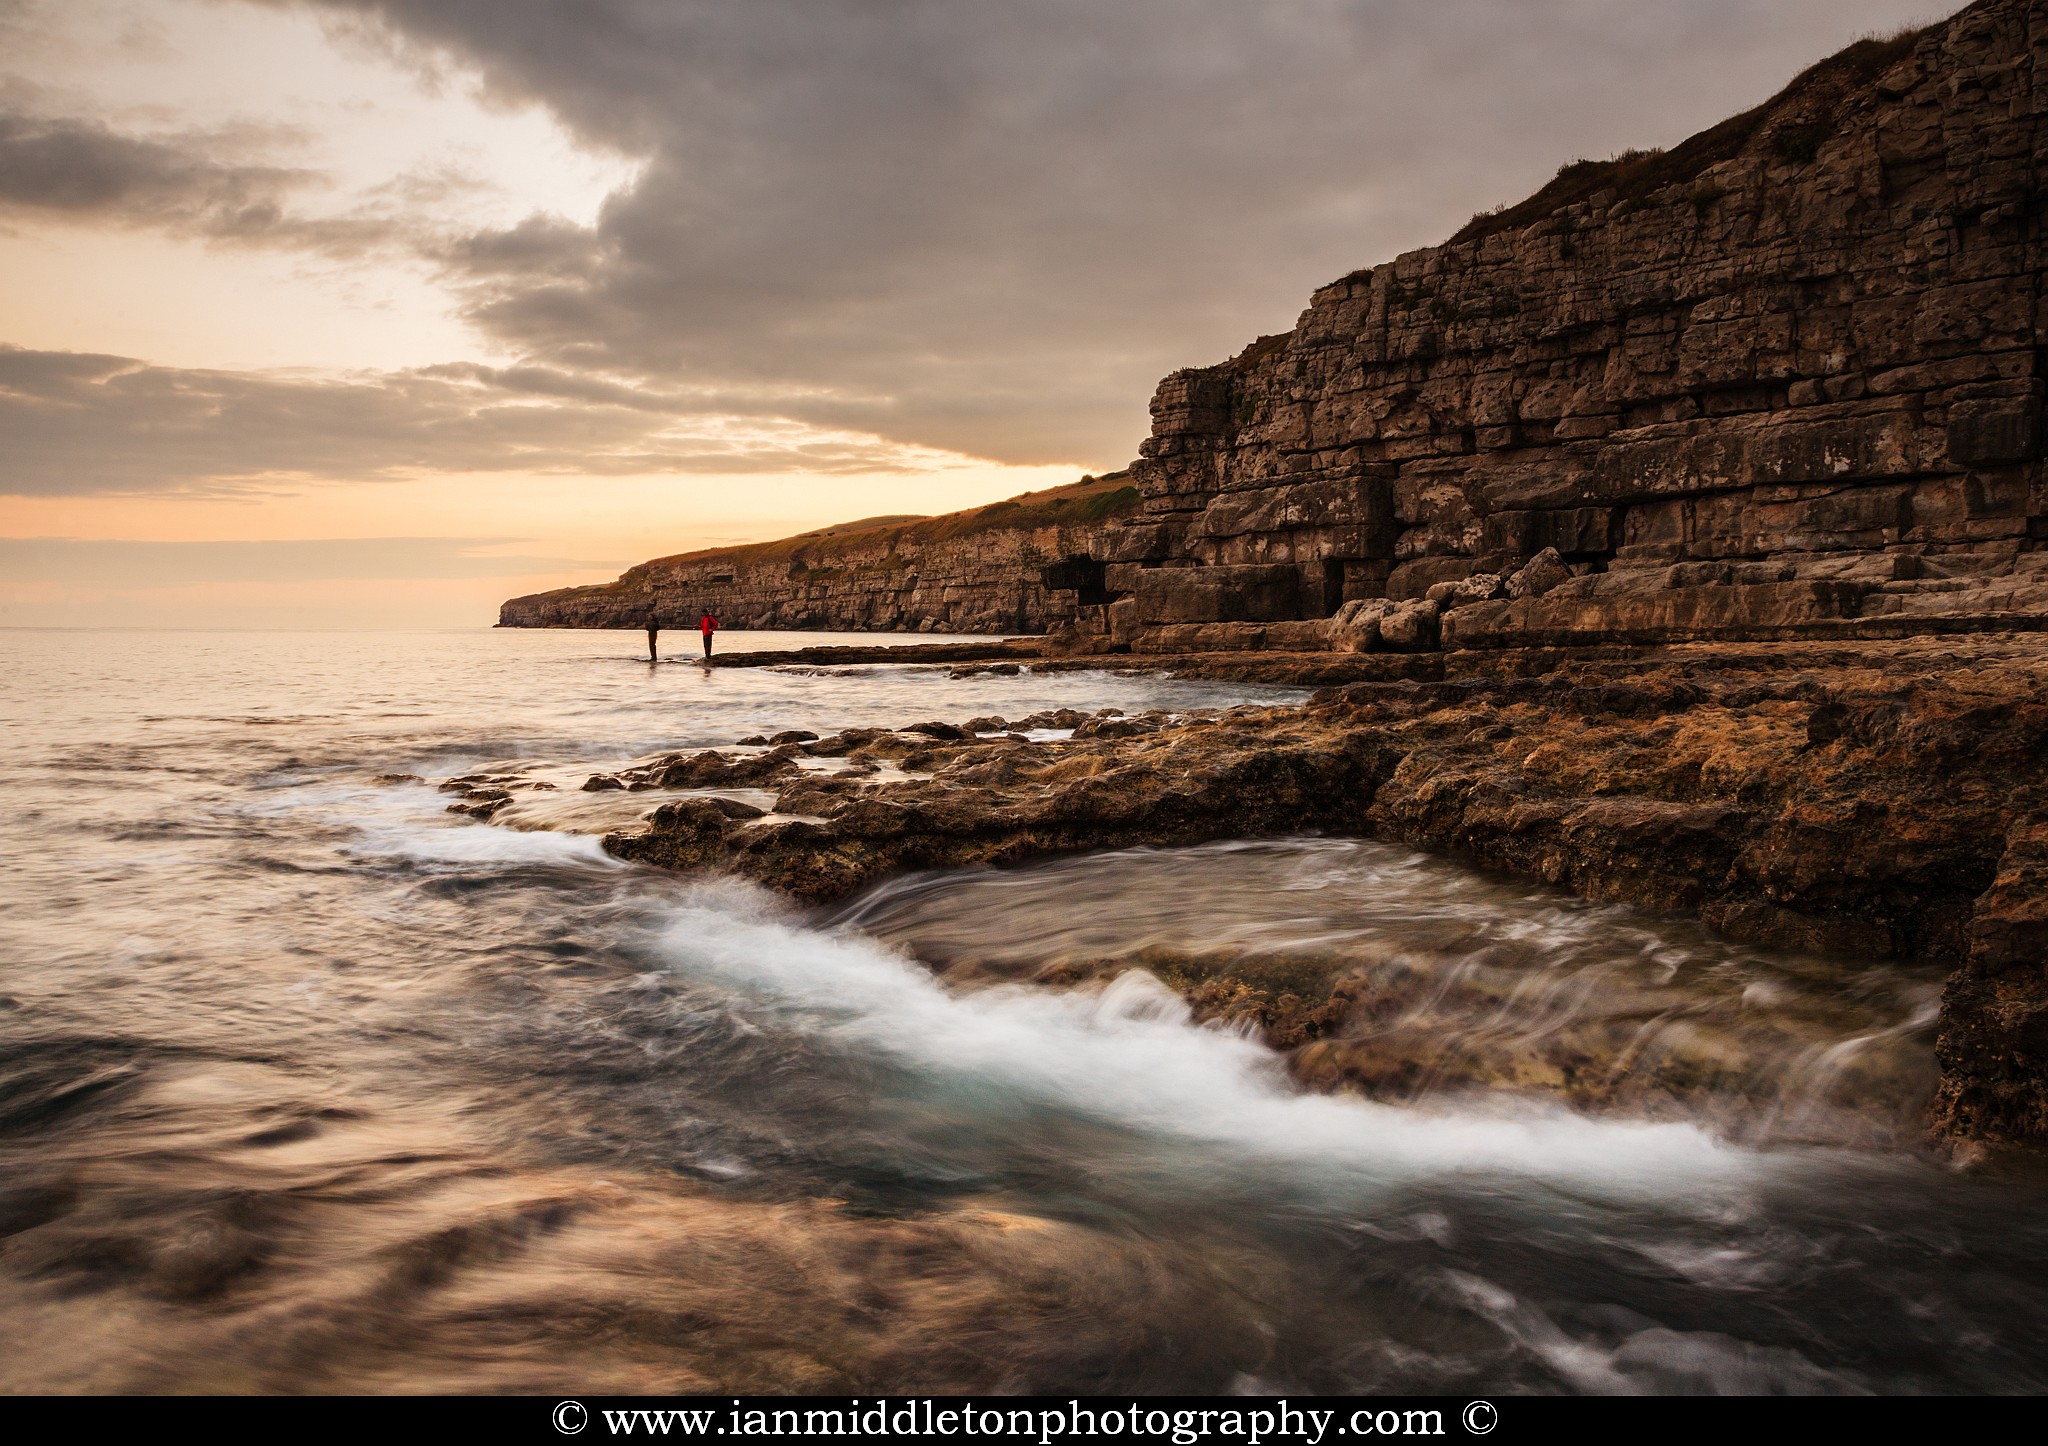 Seacombe Bay and Cliffs on the Jurassic Coast in Dorset, England. Seacombe Bay is one of the many stunning locations to visit on the Jurassic coast, a UNESCO World Heritage Site in southern England